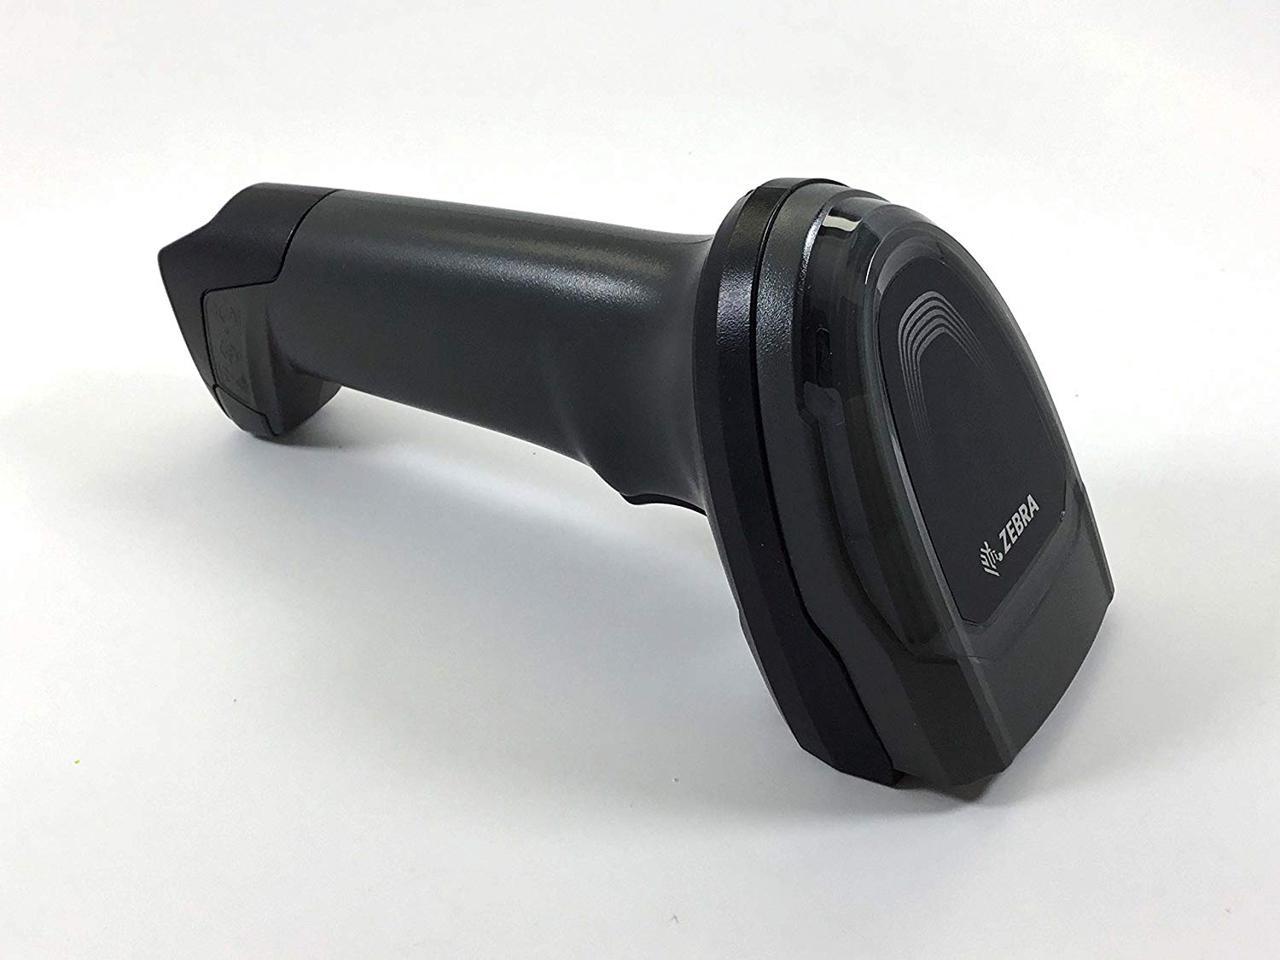 Zebra Symbol Ds8178 Sr 2d1d Wireless Bluetooth Barcode Scannerimager Includes Cradle And Usb 9407